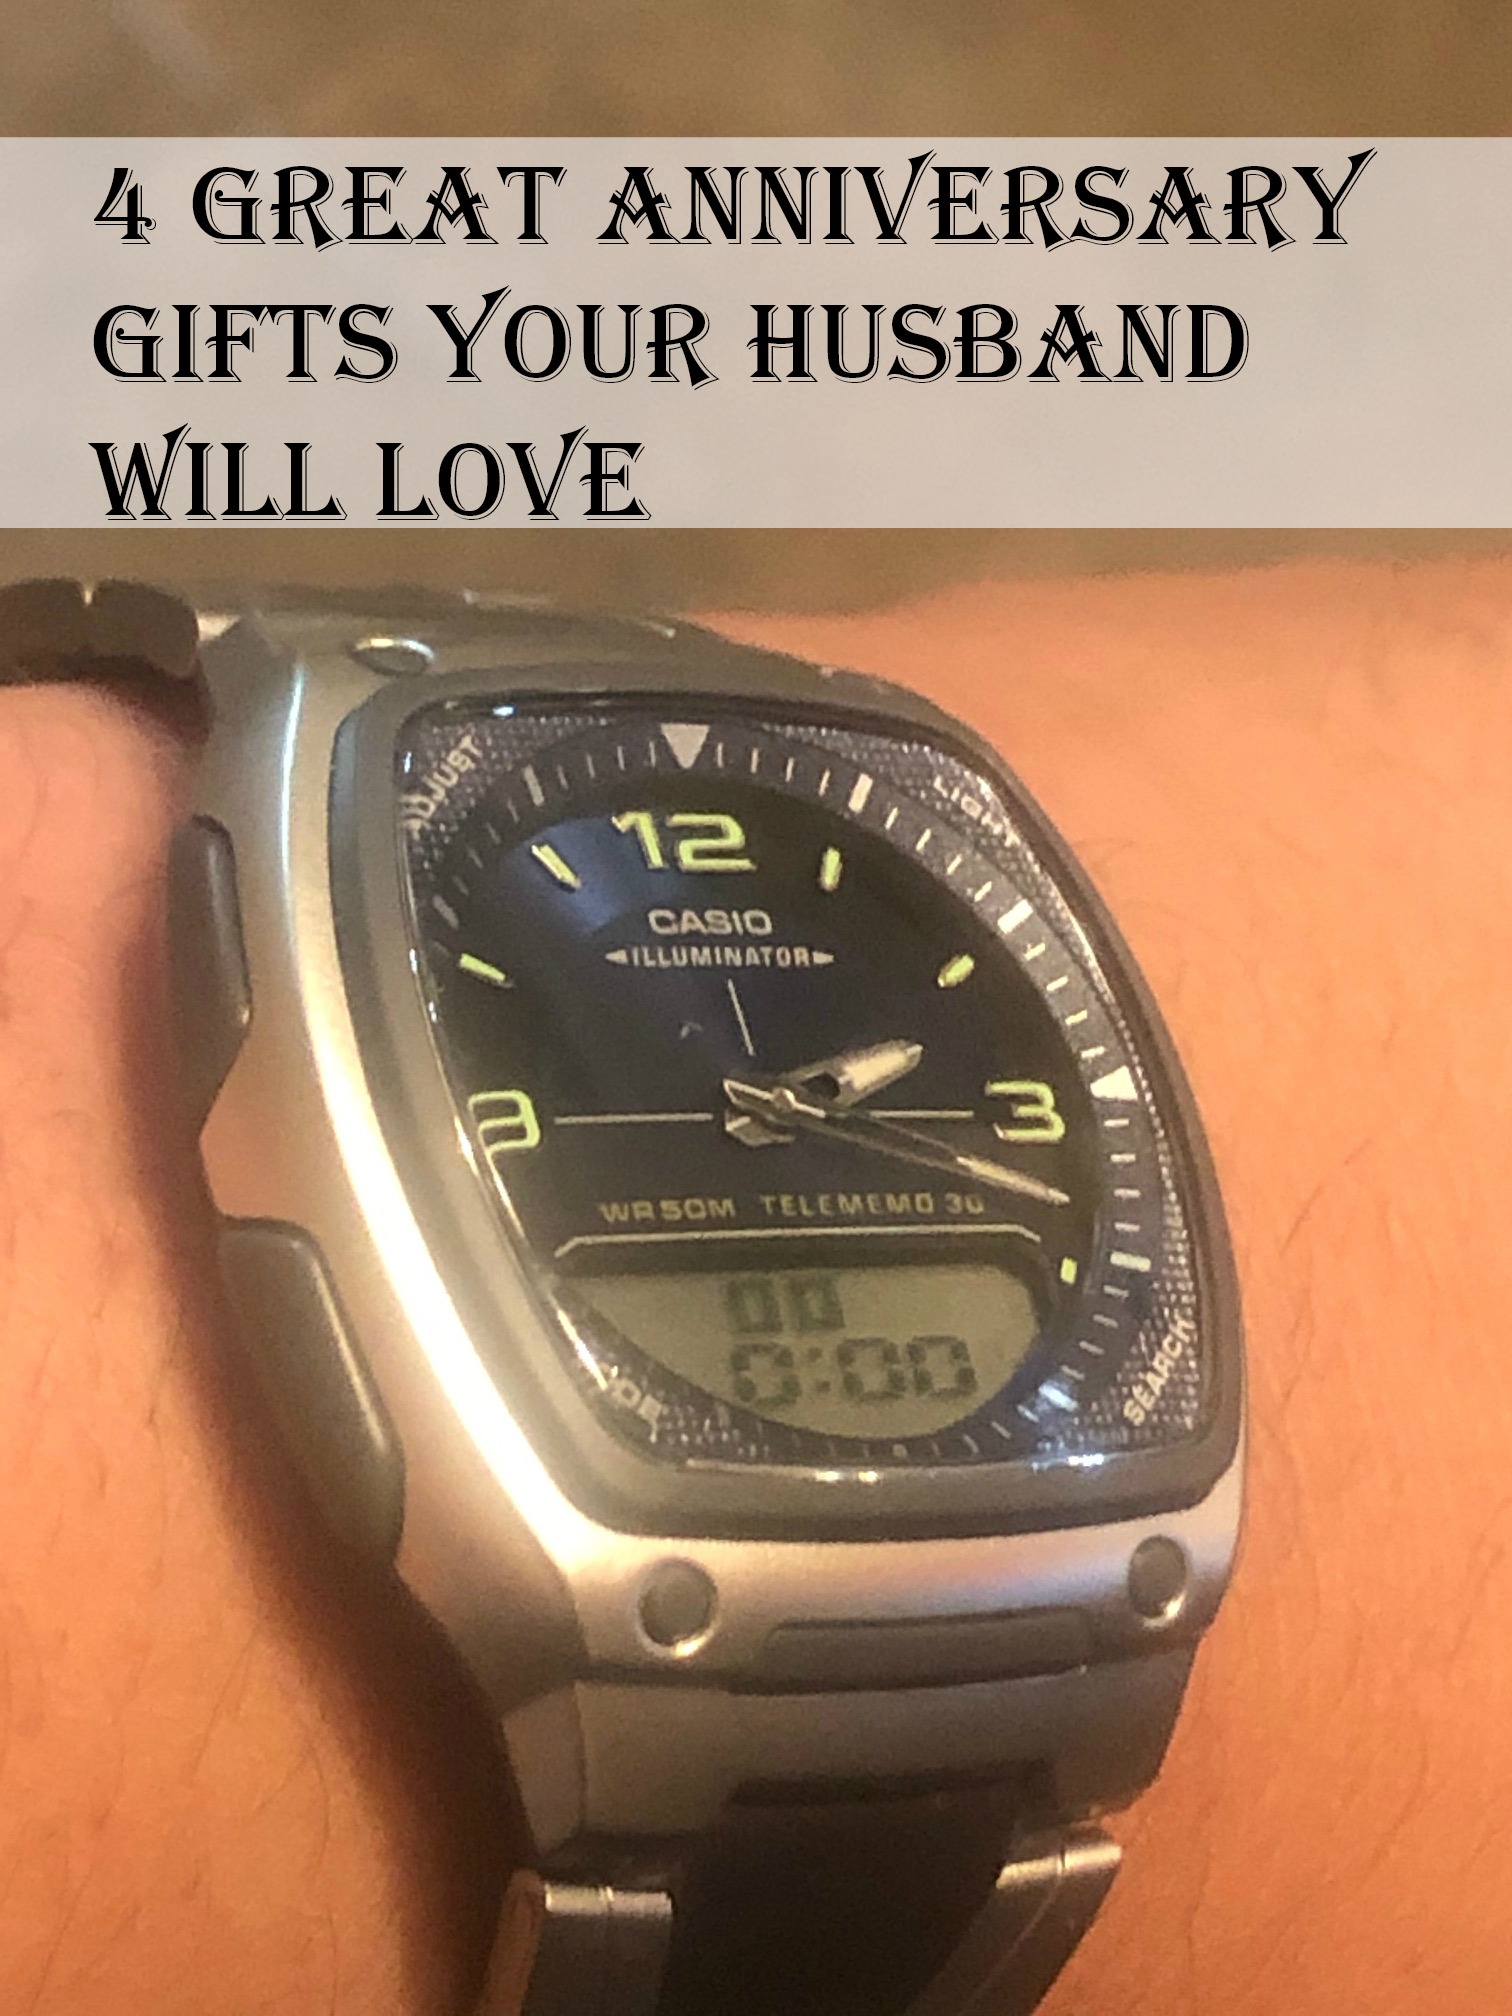 4 Great Anniversary Gifts Your Husband Will Love